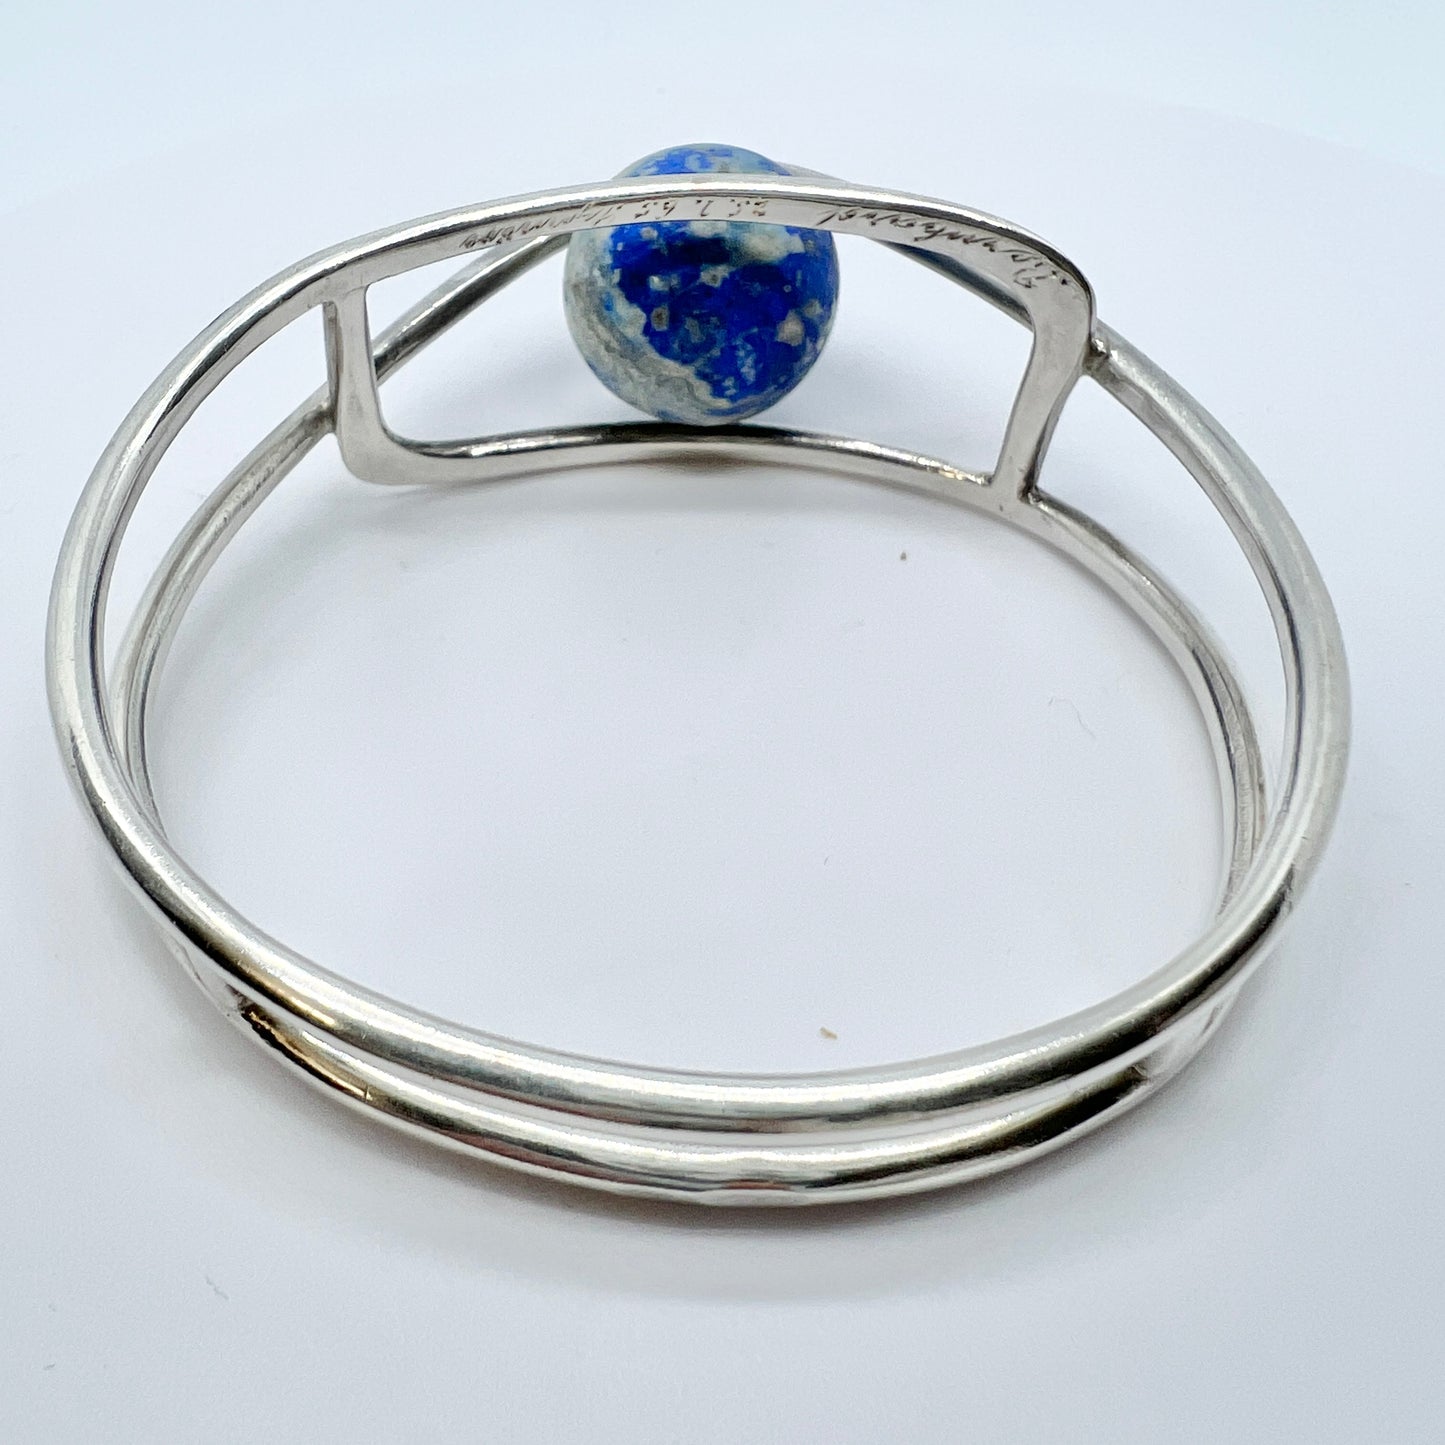 Germany/Austria 1960s. Solid 900 Silver Caged Kinetic Sodalite Ball Bangle Bracelet. Makers Mark.